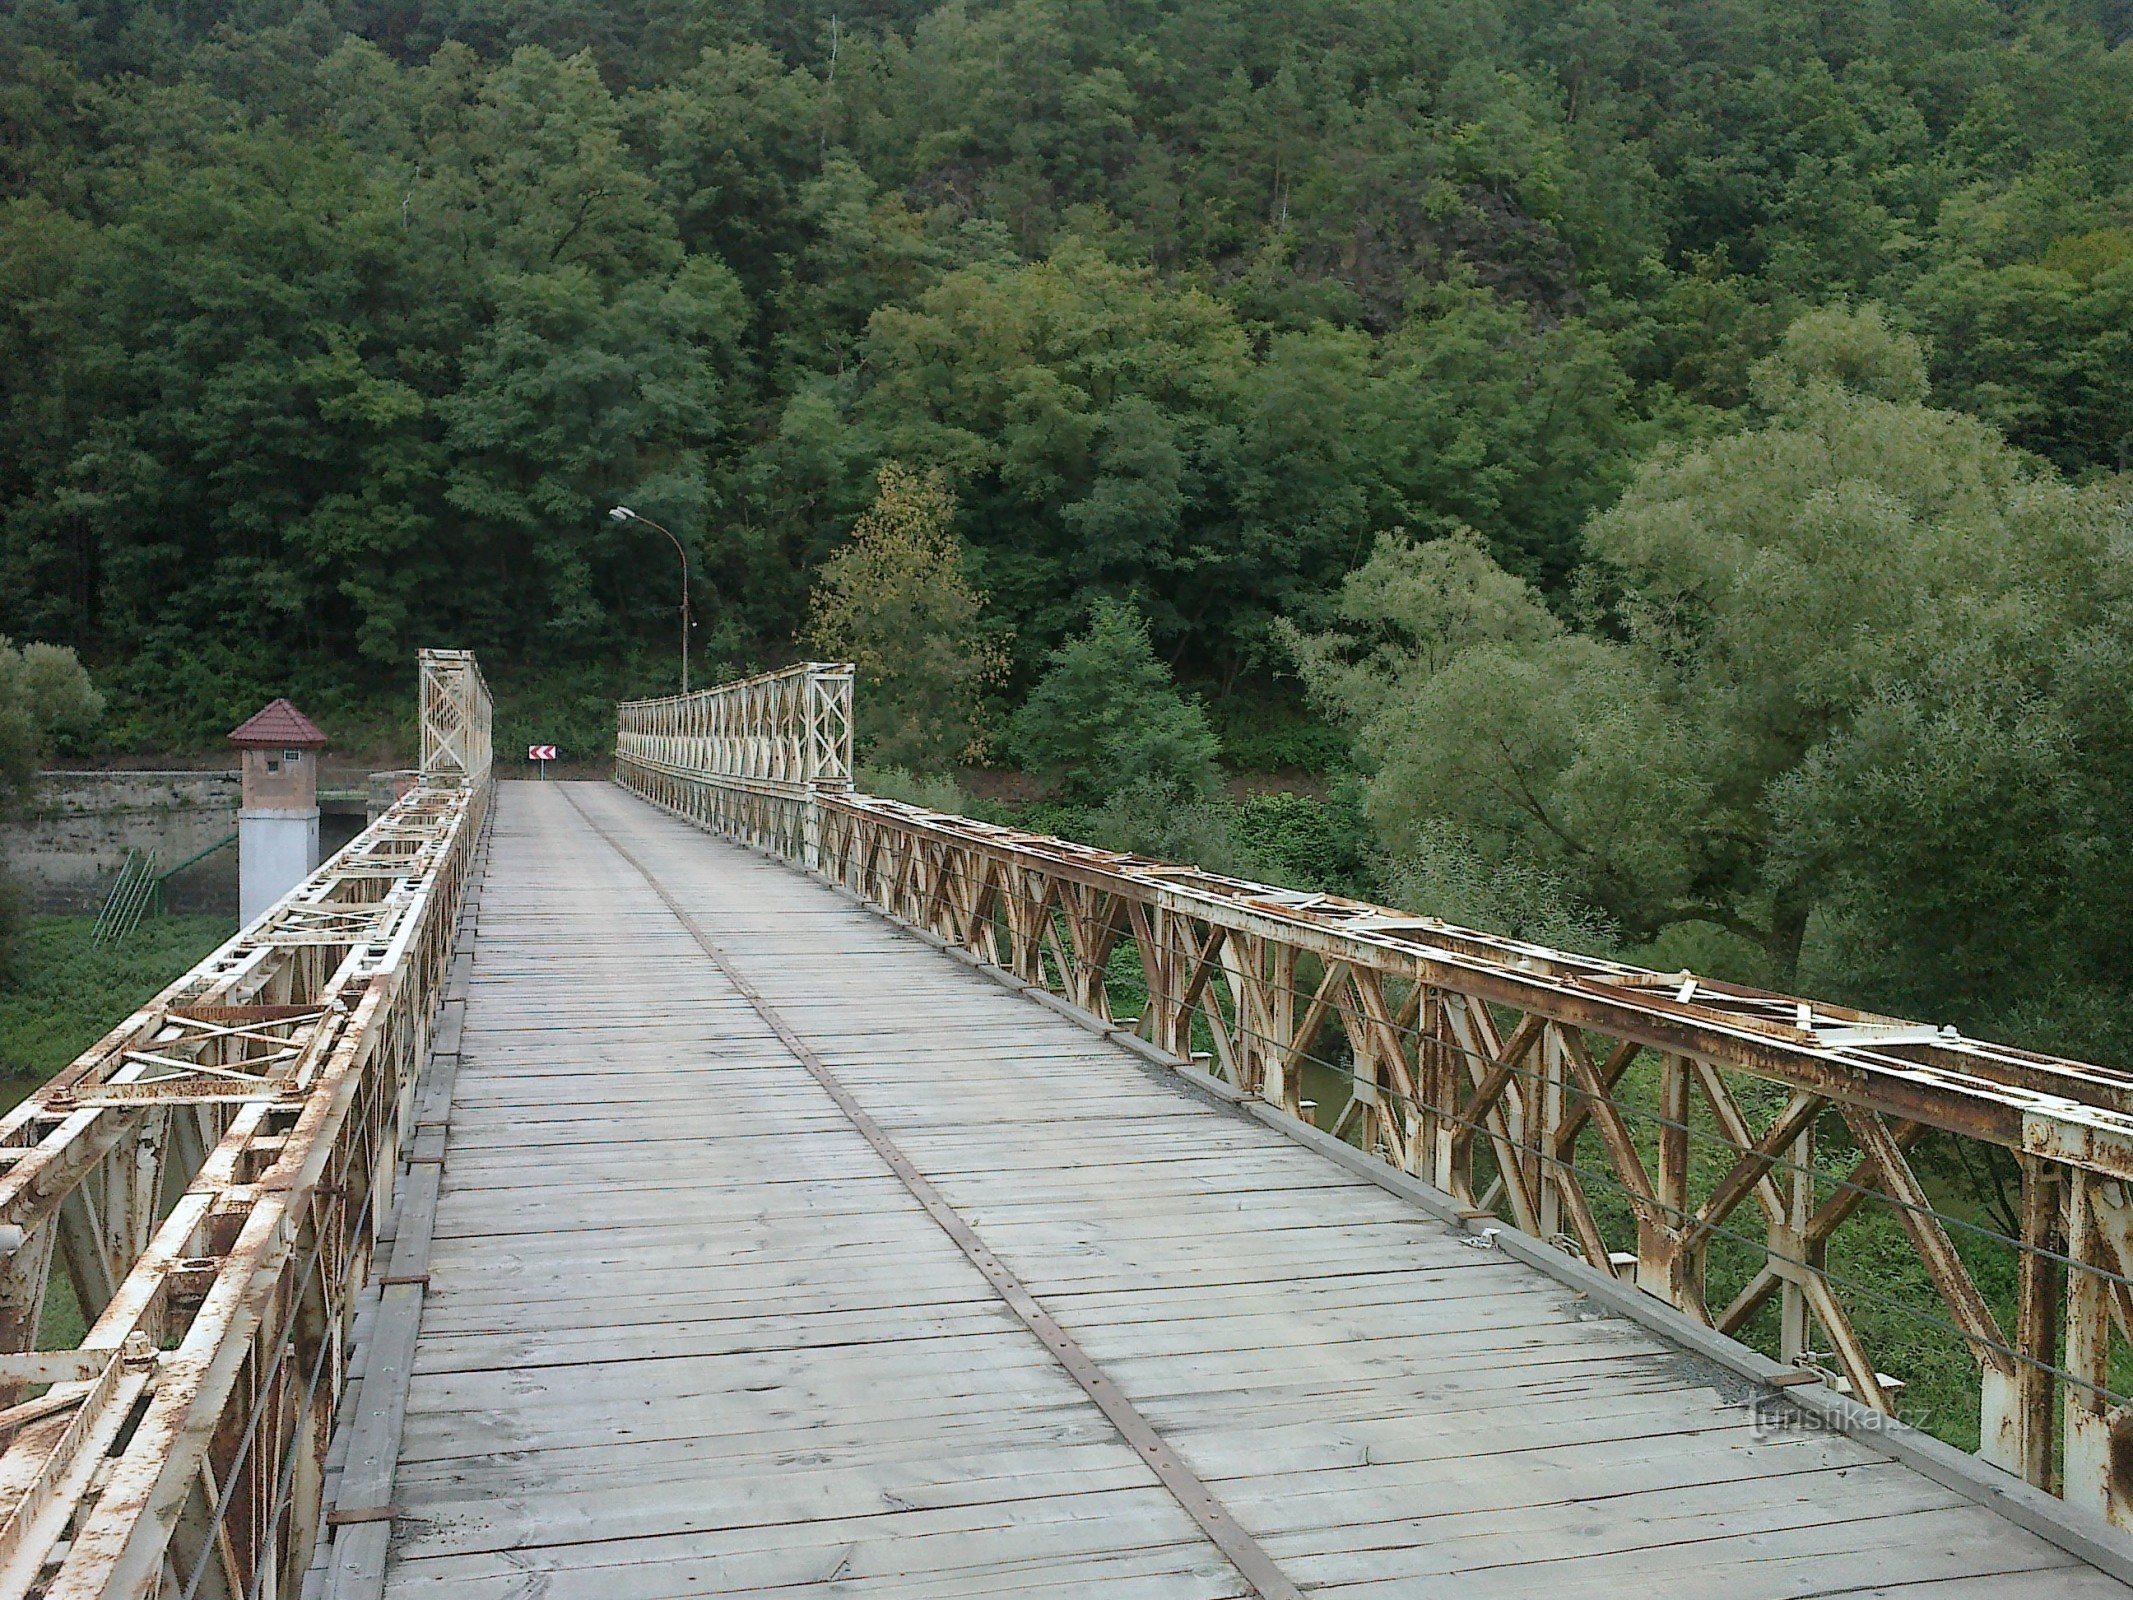 View of the bridge in the direction of the town